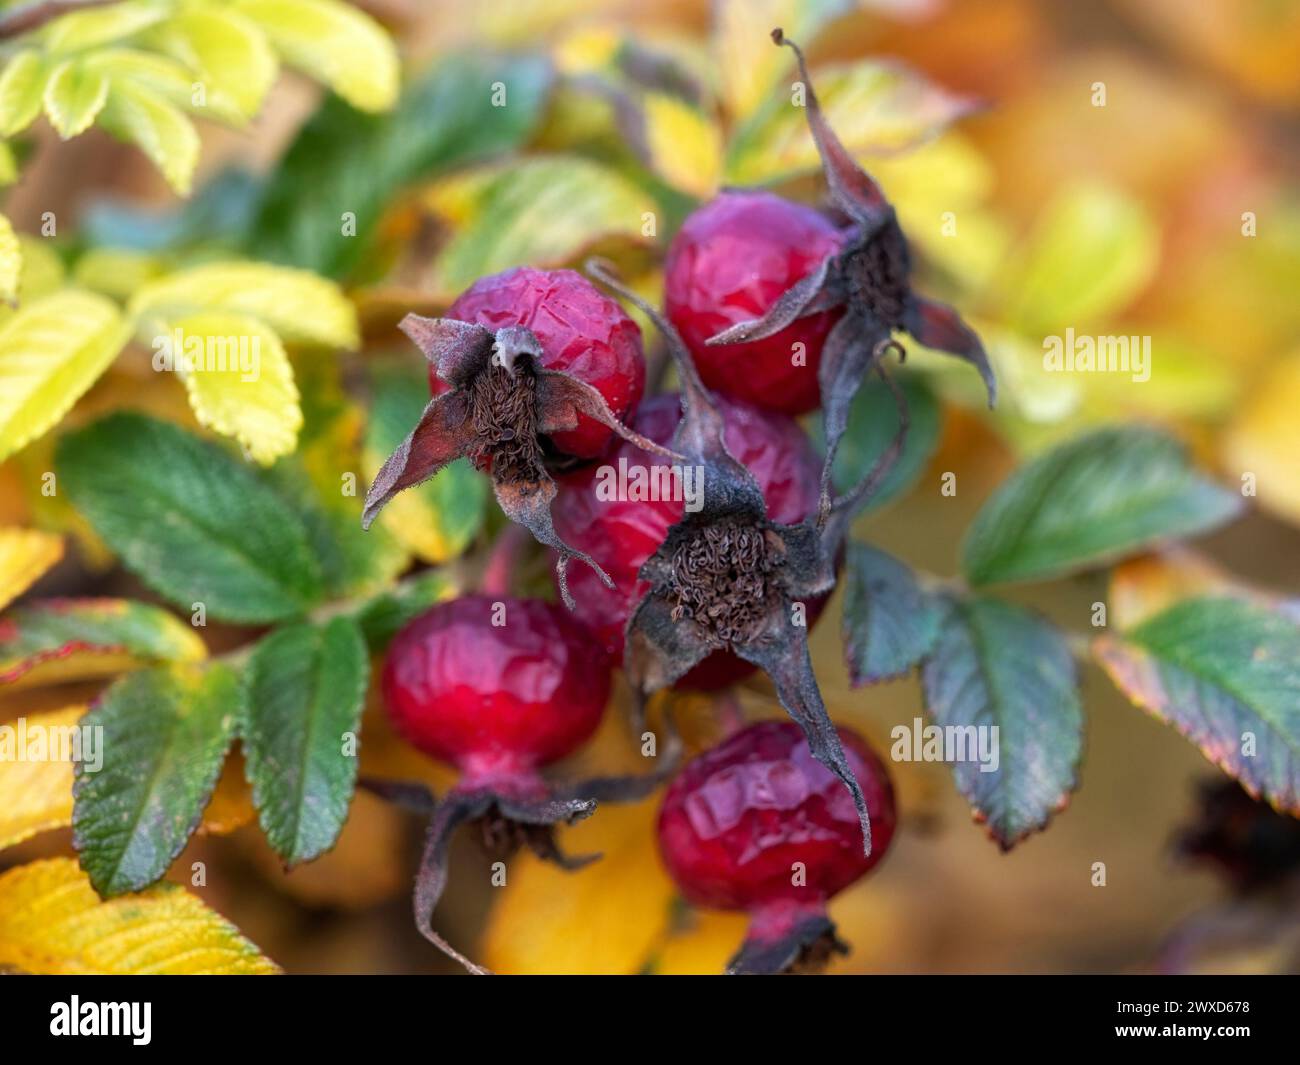 Closeup of yellow flowers and withered red rose hip fruits of Rosa rugosa 'Rubra' in Autumn Stock Photo